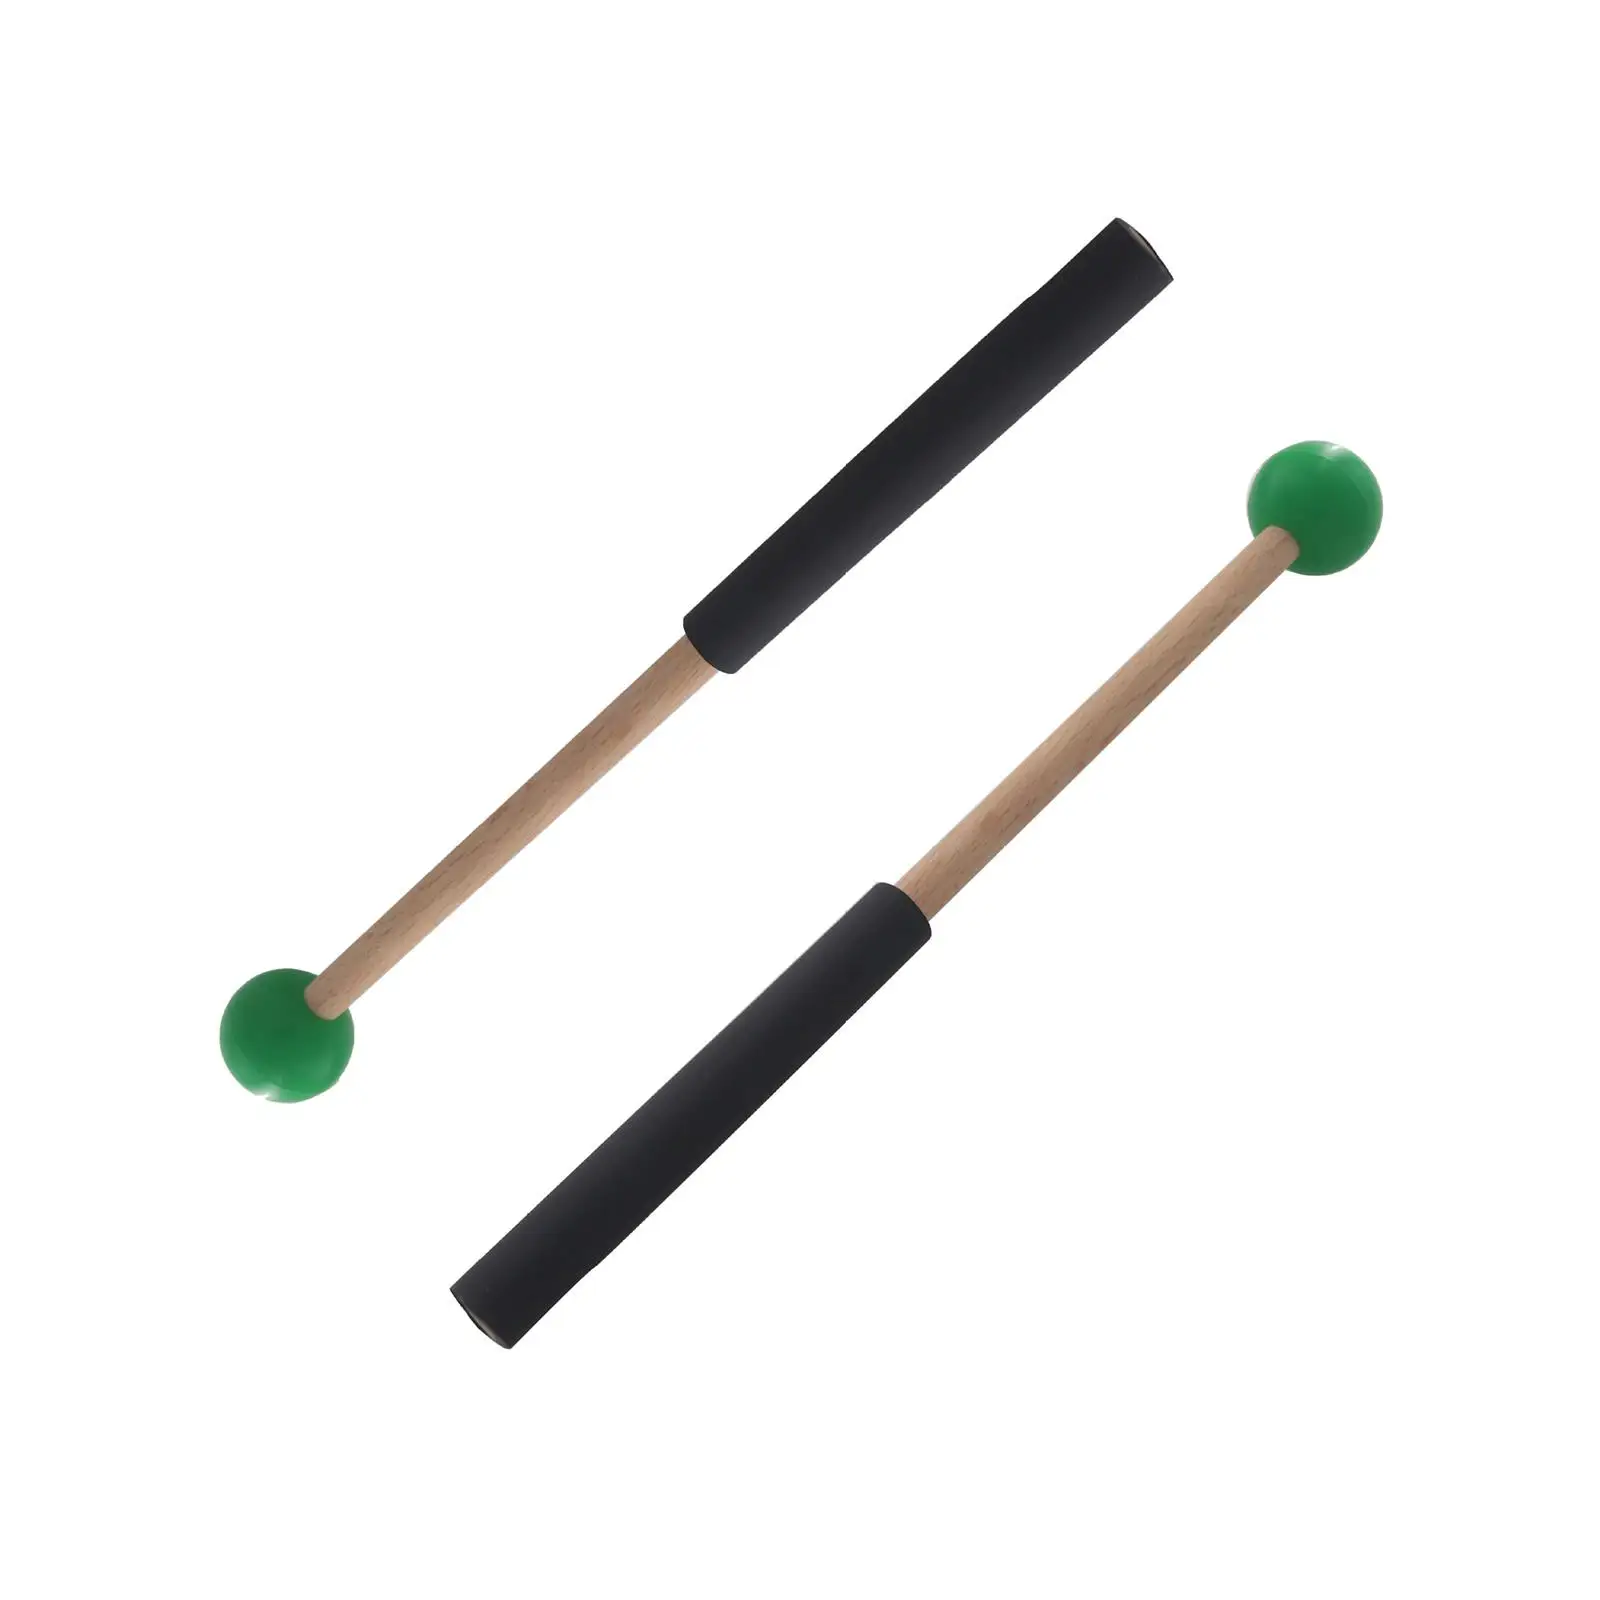 2Pcs 8.6inch Rubber Mallet Percussion Musical Drumstick with Wood Handle Lightweight Drum Mallet for Carillon Xylophone Yoga